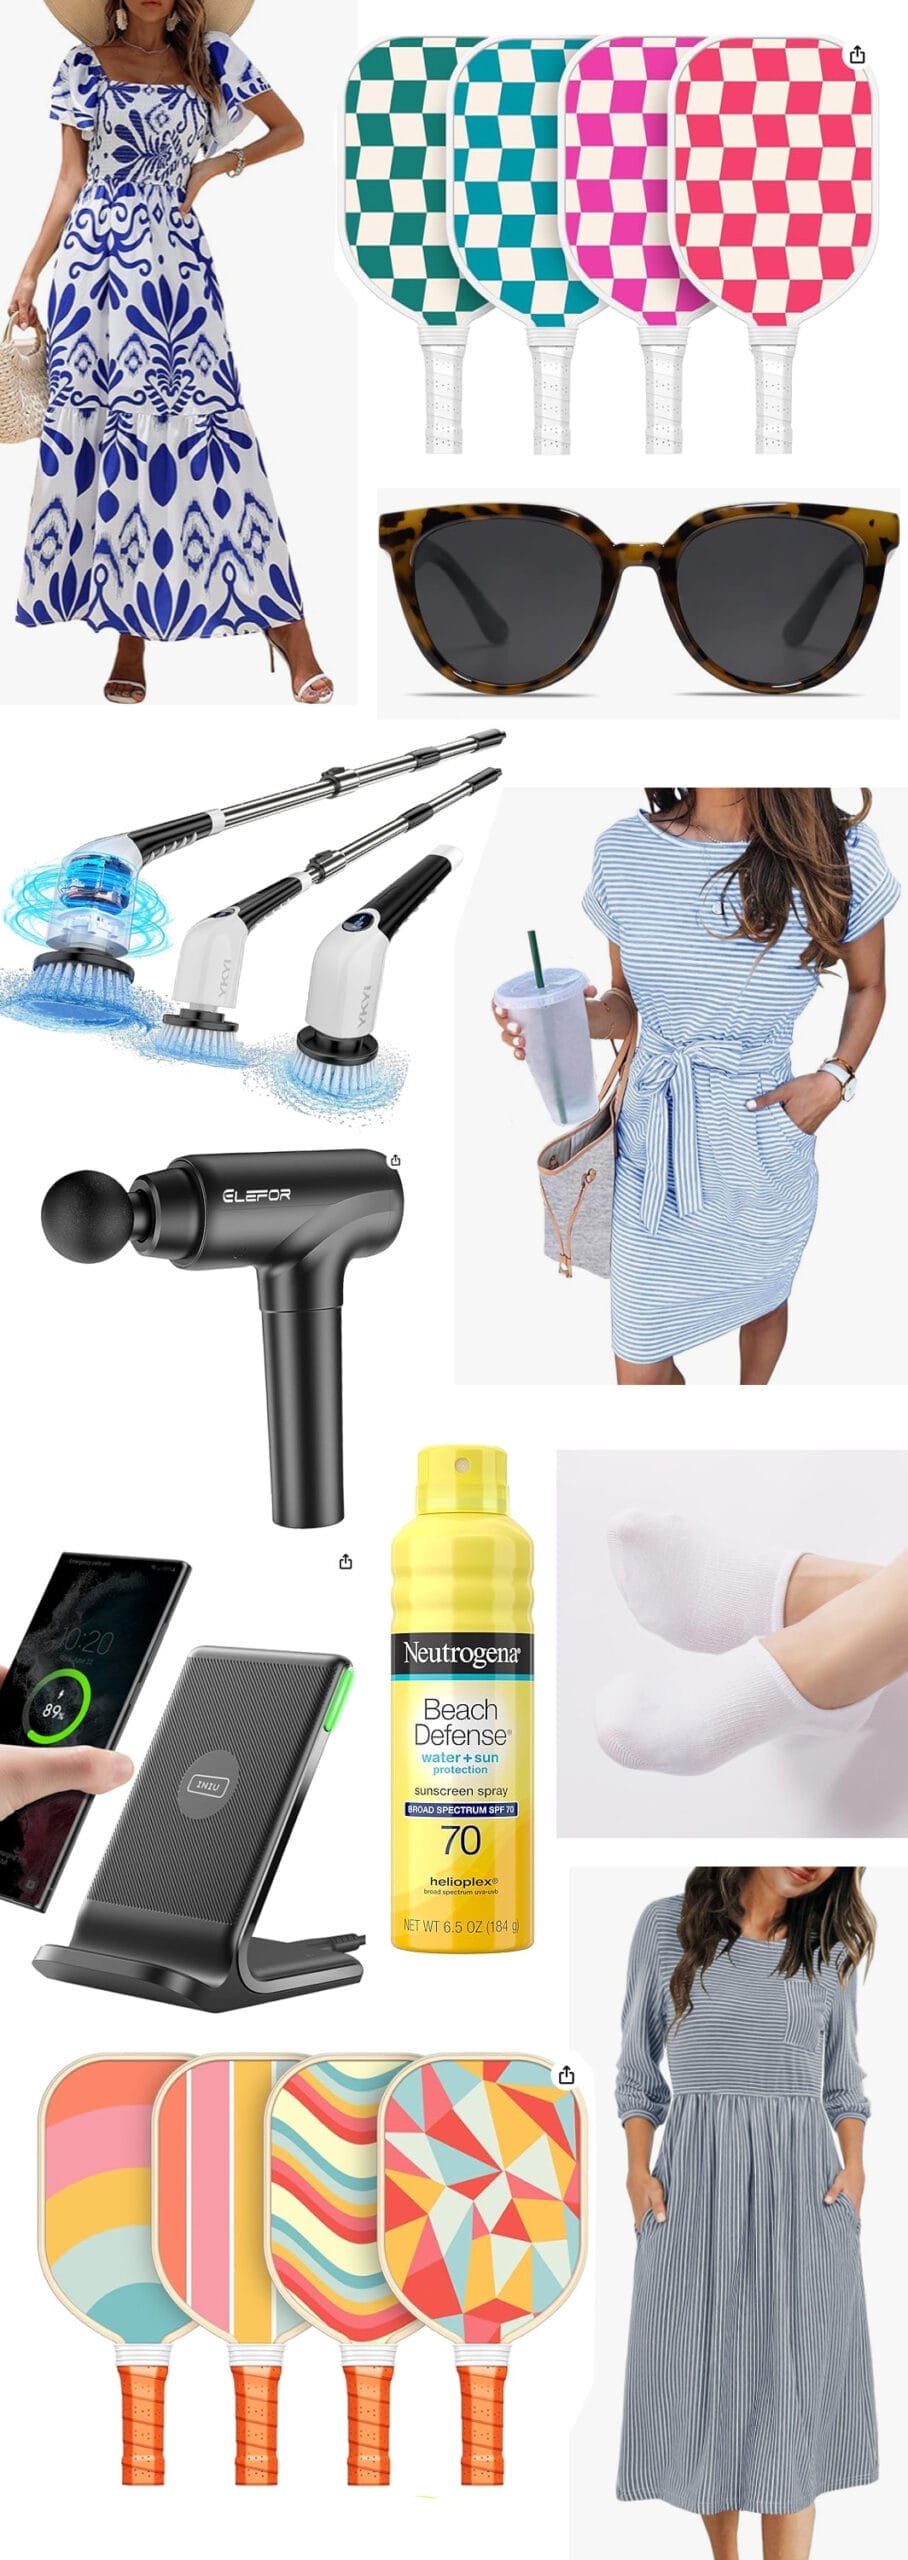 Items that are places on a whitebackground that are part of the Amazon sale.